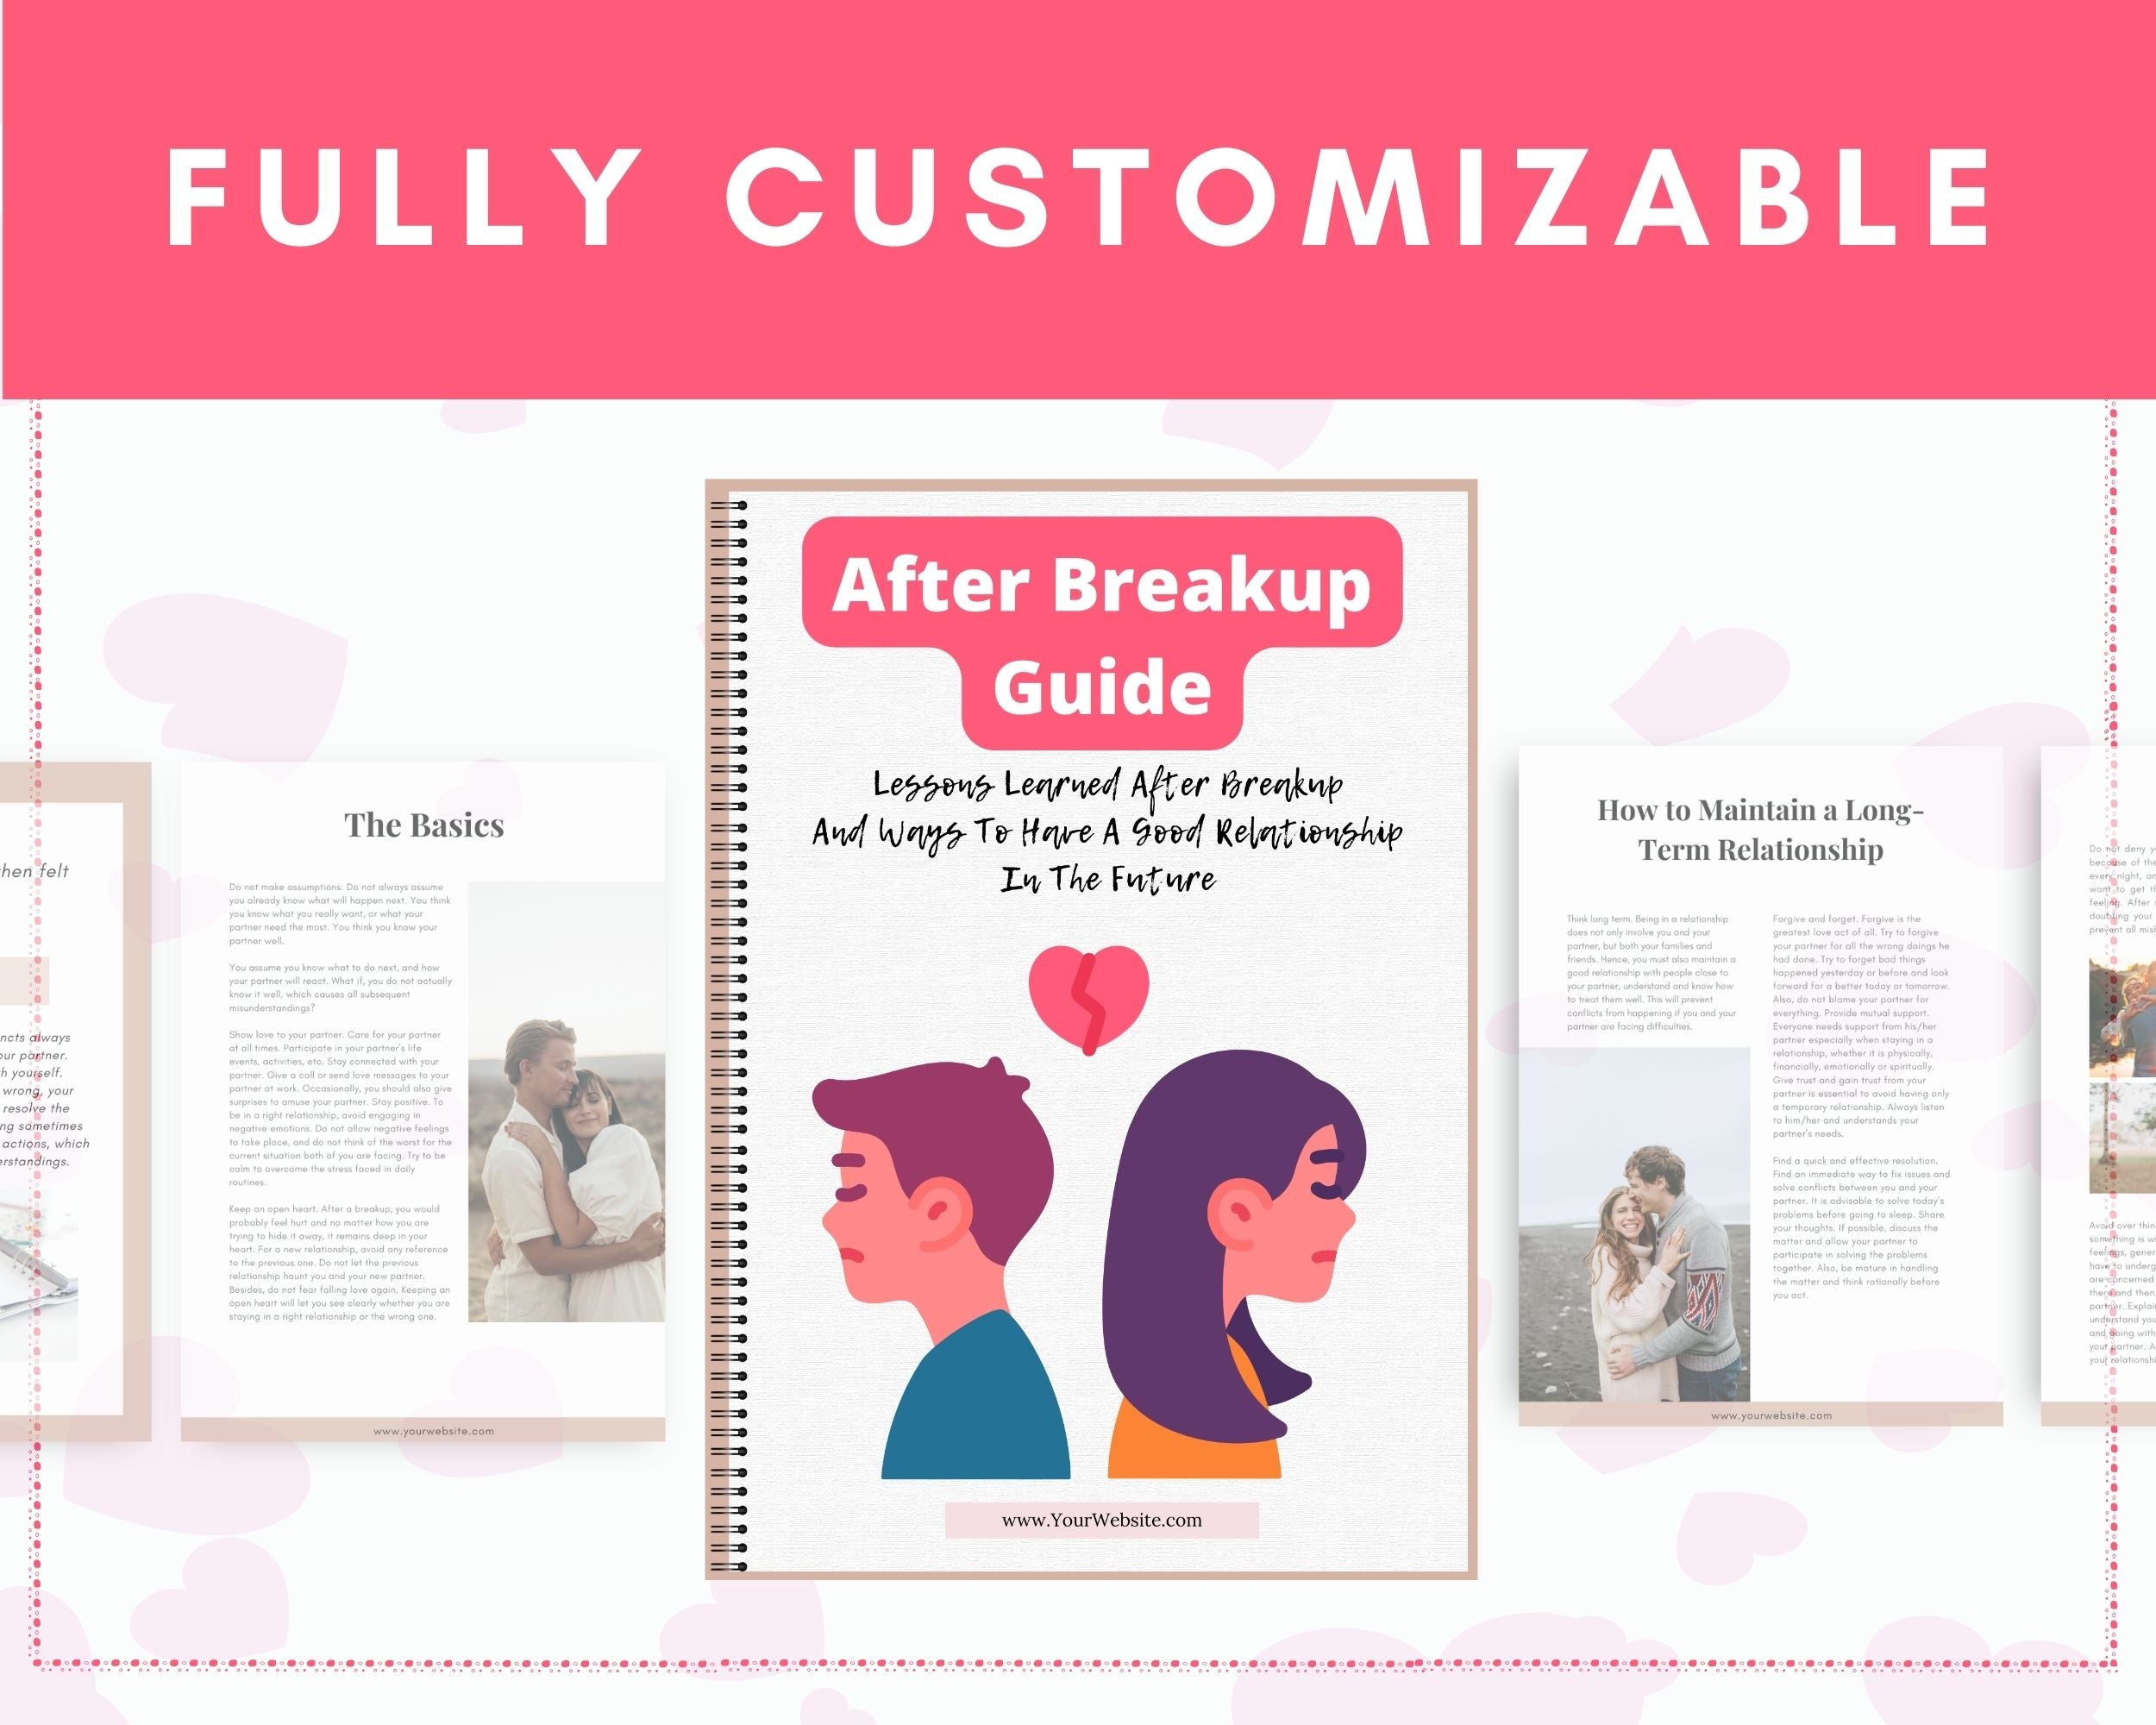 Editable After Breakup Guide | Done-for-You Ebook in Canva | Rebrandable and Resizable Canva Template